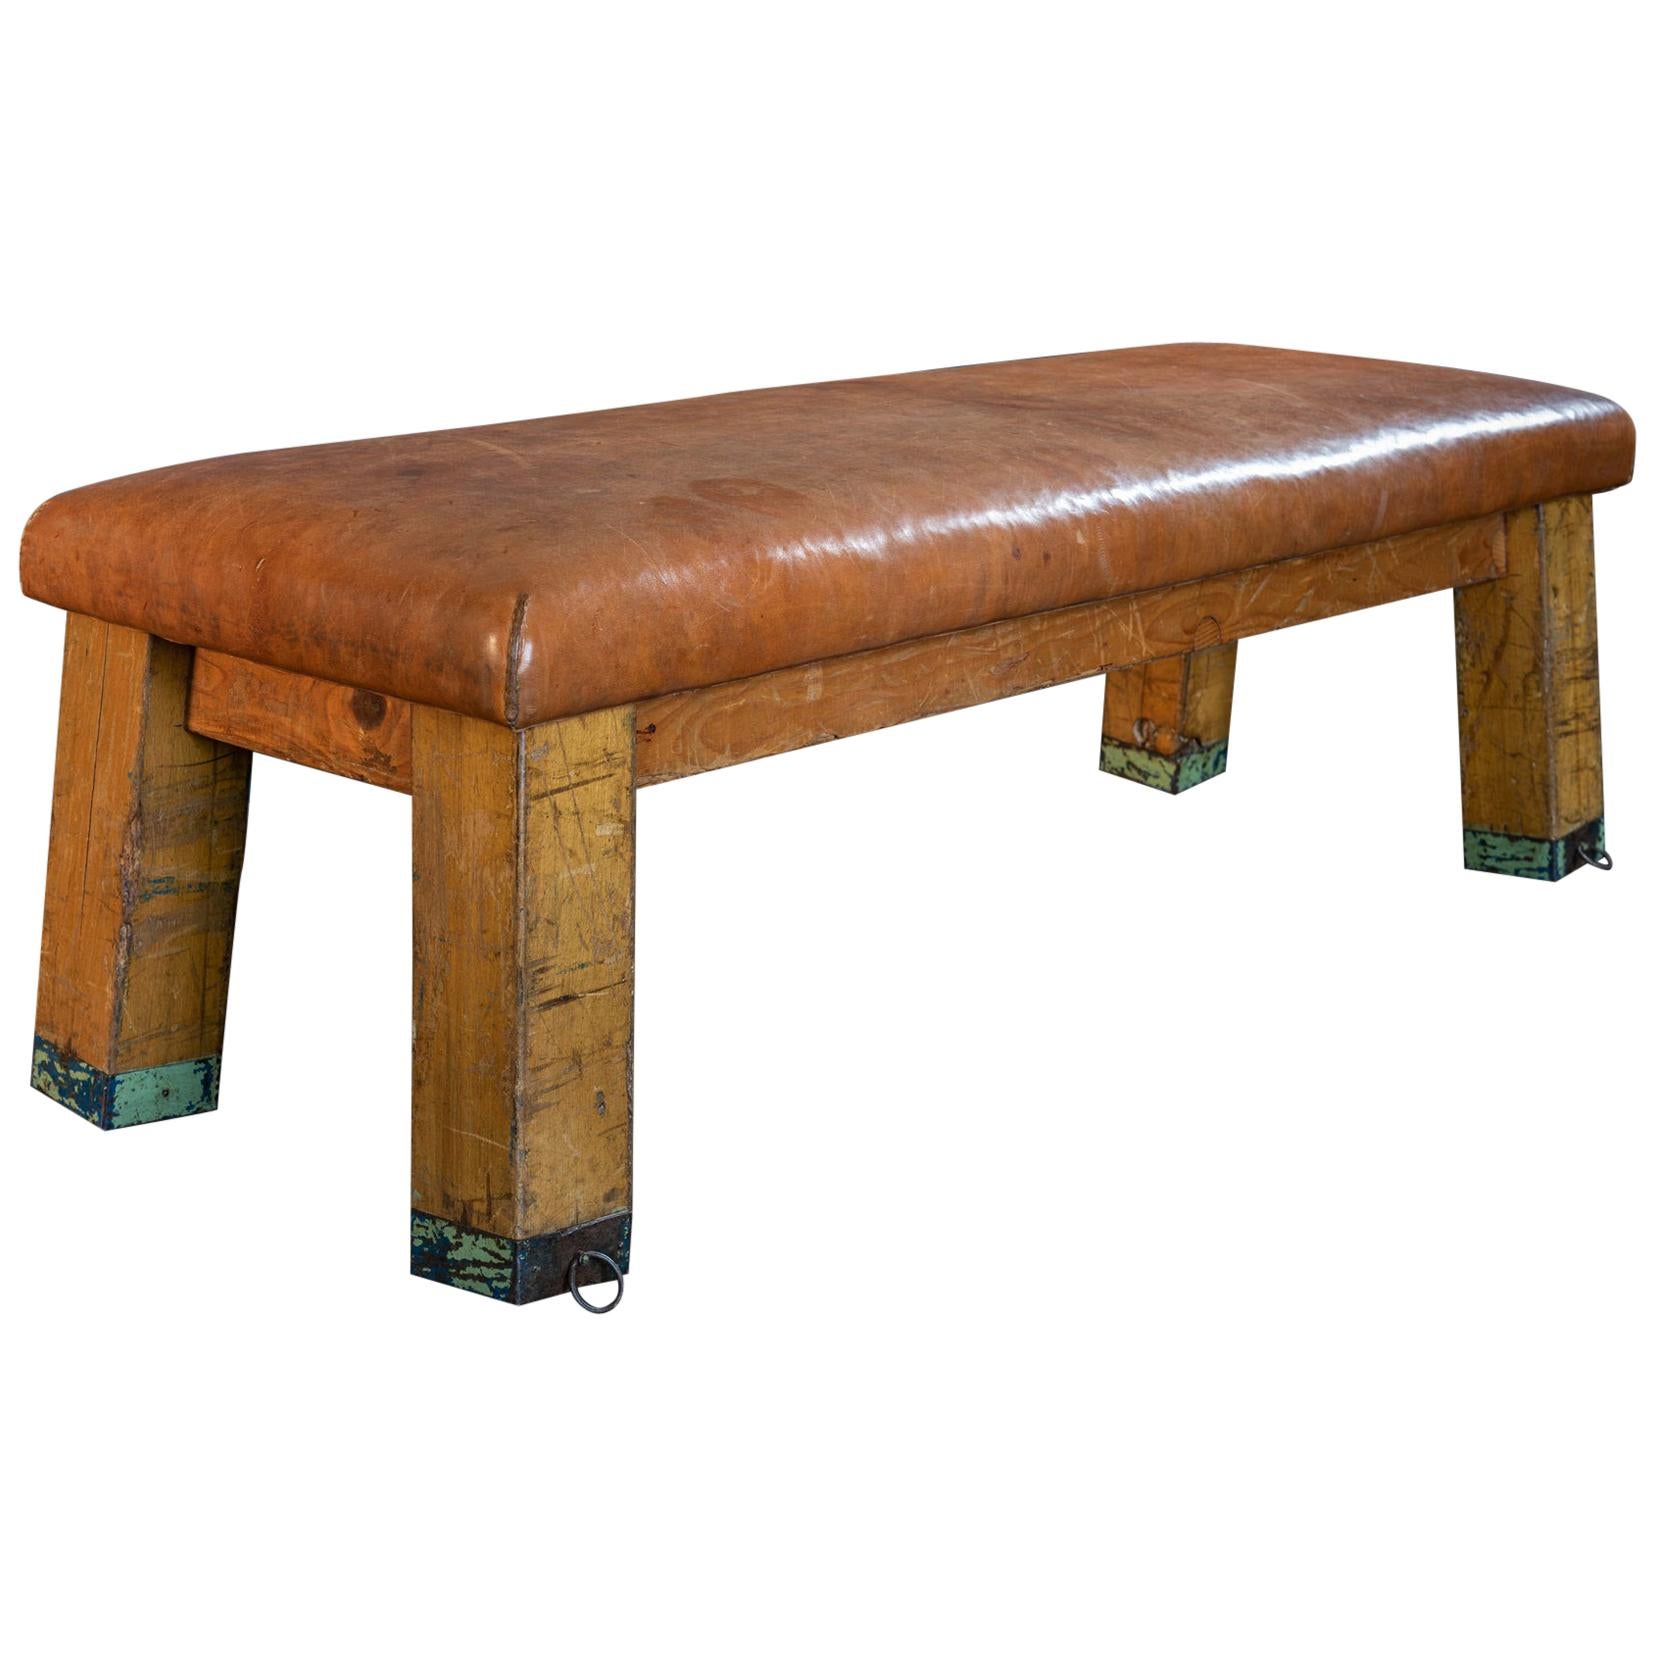 English Beech Vaulting Bench/Coffee Table in Cognac Leather, Early 20th Century